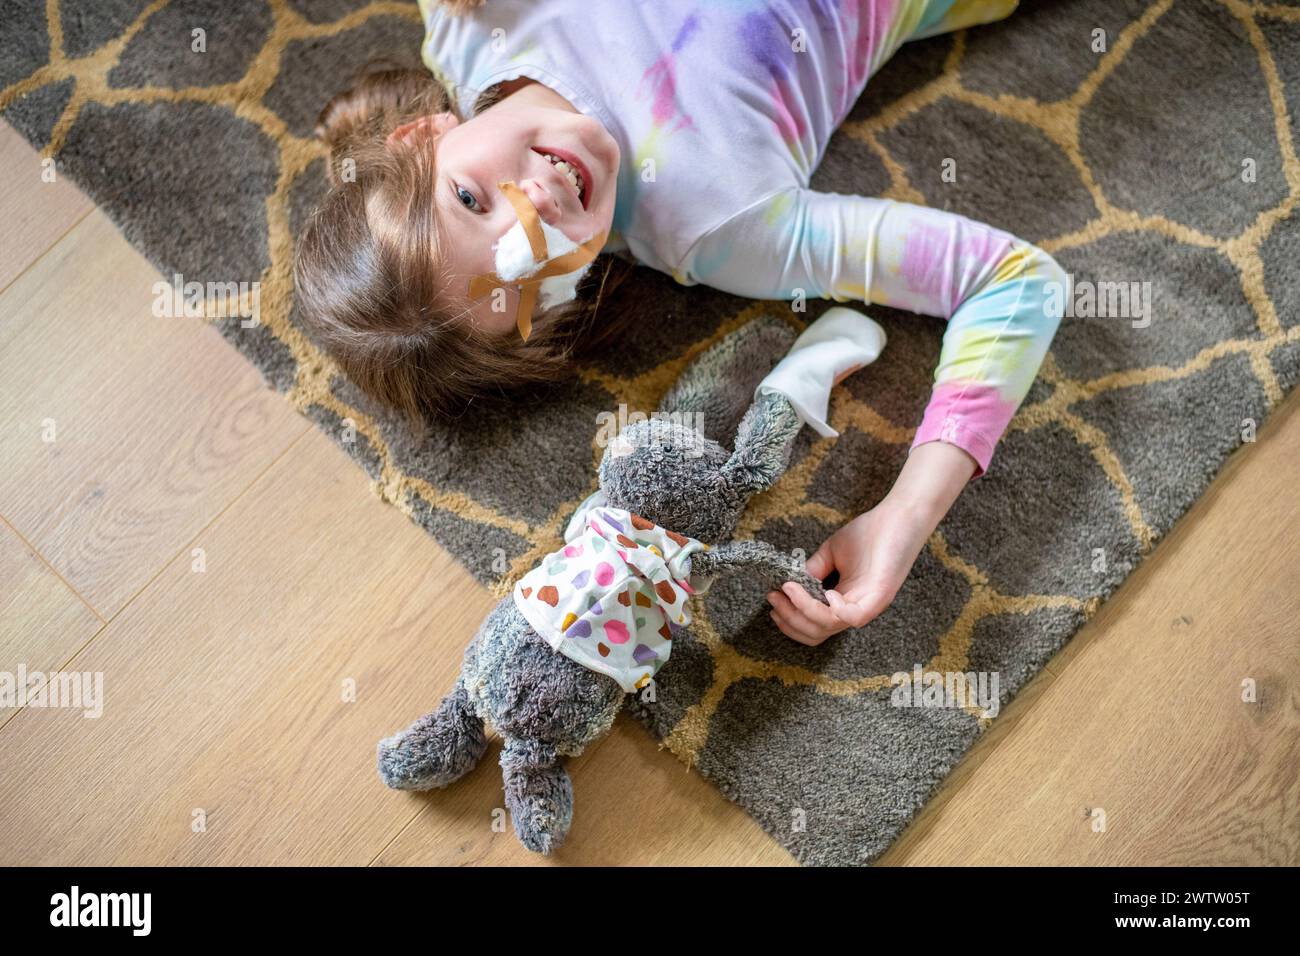 Young girl lying on the floor with her stuffed bunny by her side Stock Photo